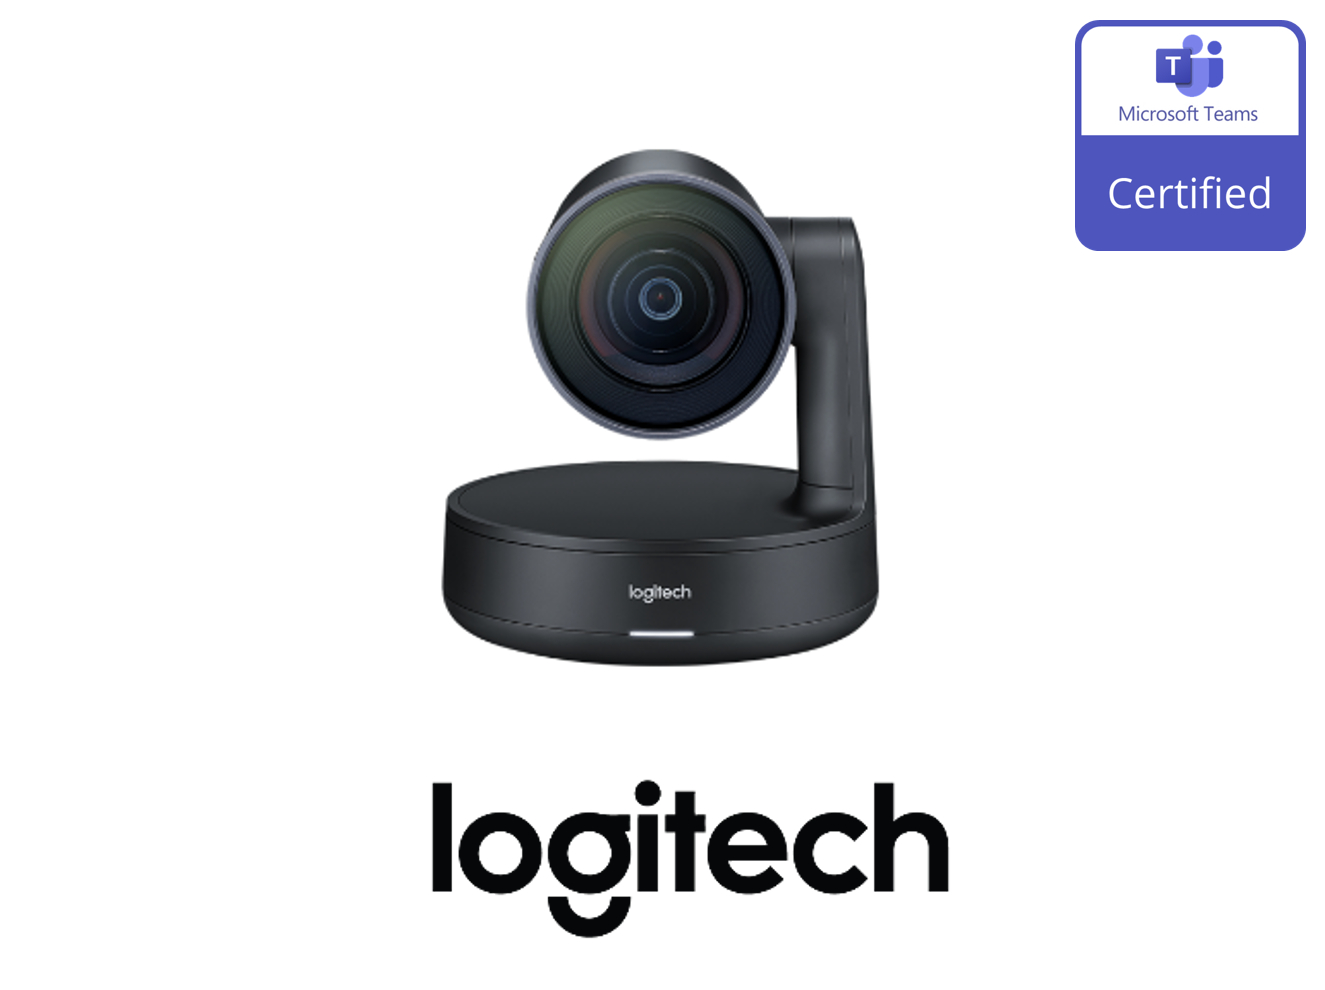 Logitech Rally Camera Certified for Microsoft Teams